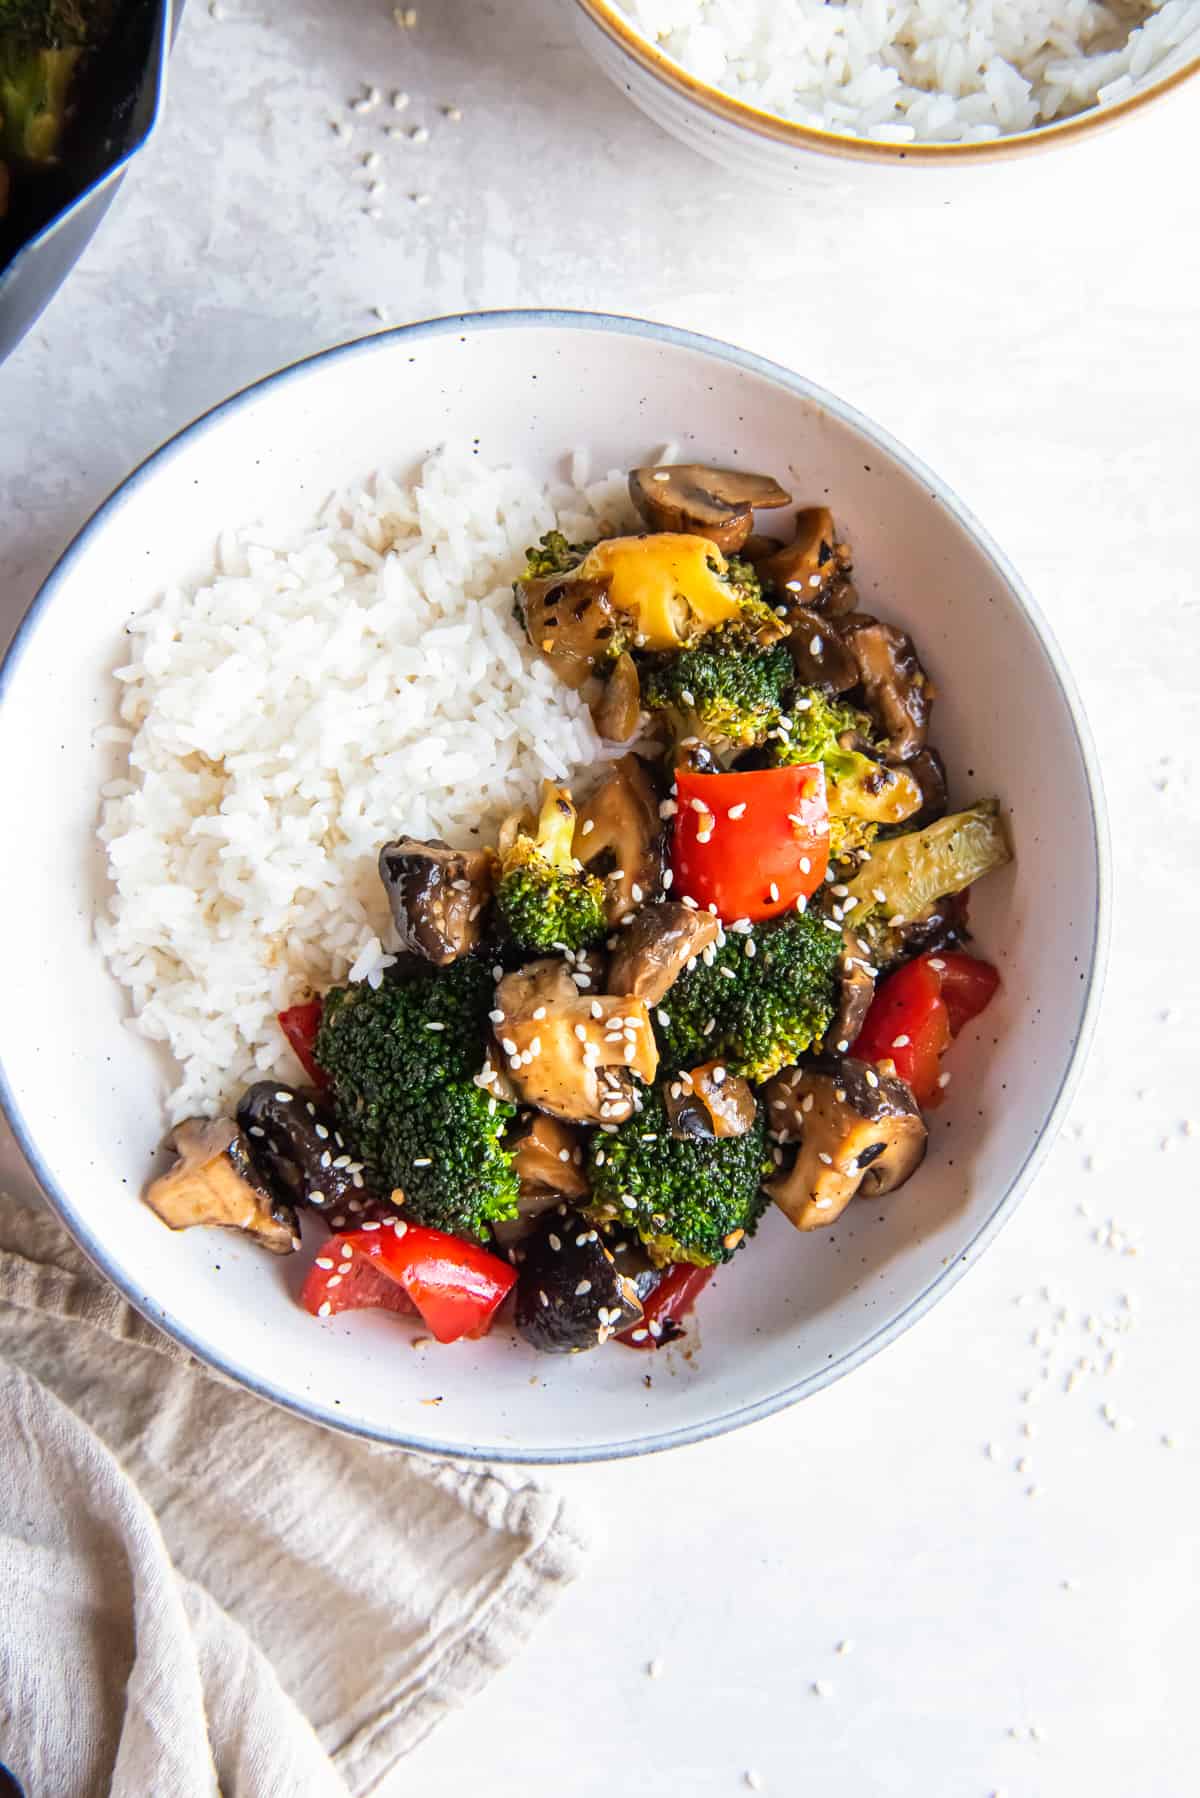 A top down shot of broccoli mushroom stir fry with white rice in a bowl.